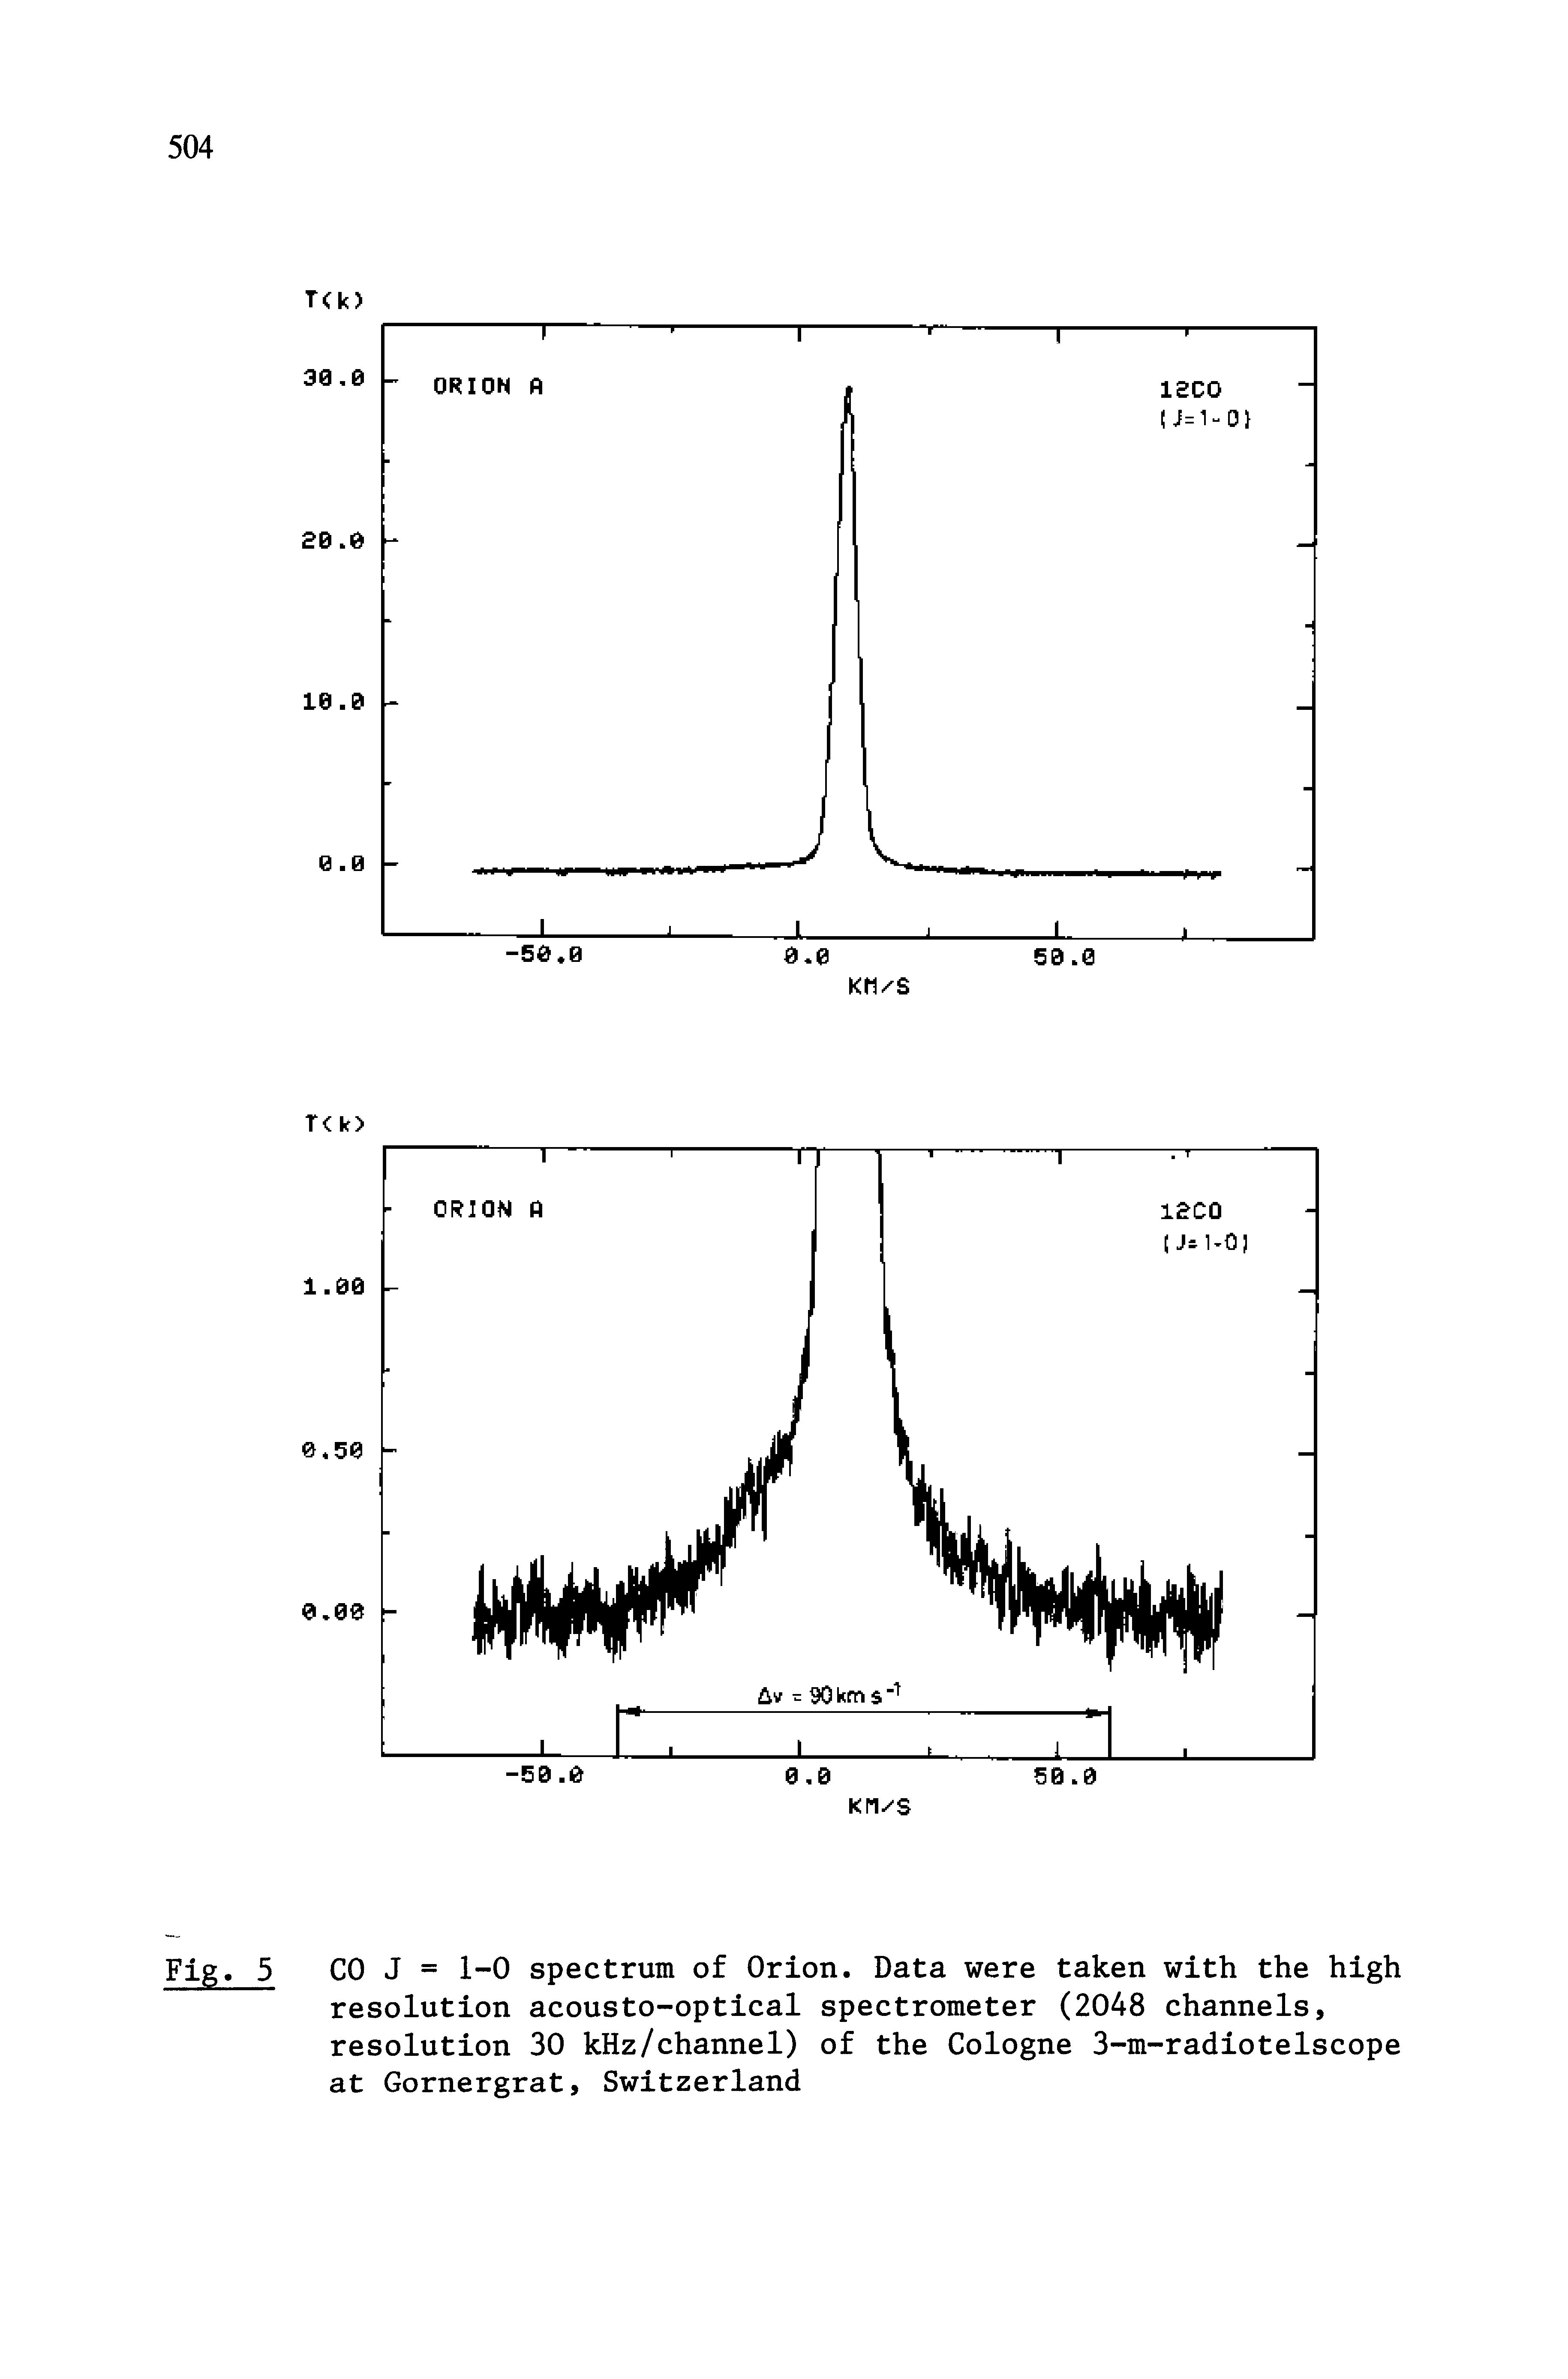 Fig. 5 CO J = 1-0 spectrum of Orion. Data were taken with the high resolution acousto-optical spectrometer (2048 channels, resolution 30 kHz/channel) of the Cologne 3-m-radiotelscope at Gornergrat, Switzerland...